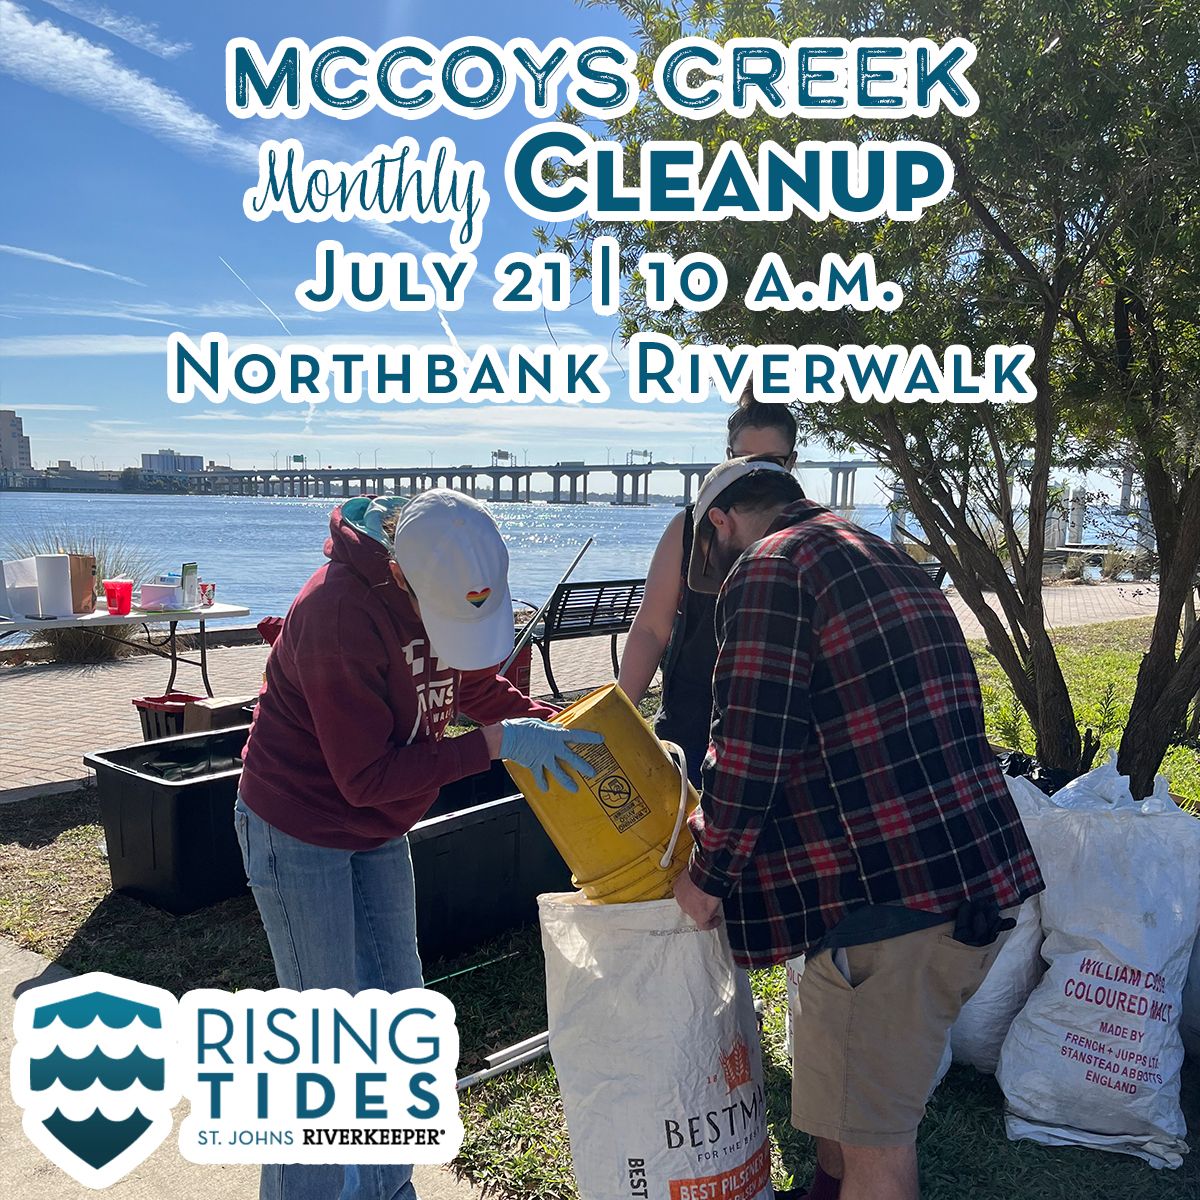 Rising Tides McCoys Creek Cleanup: July